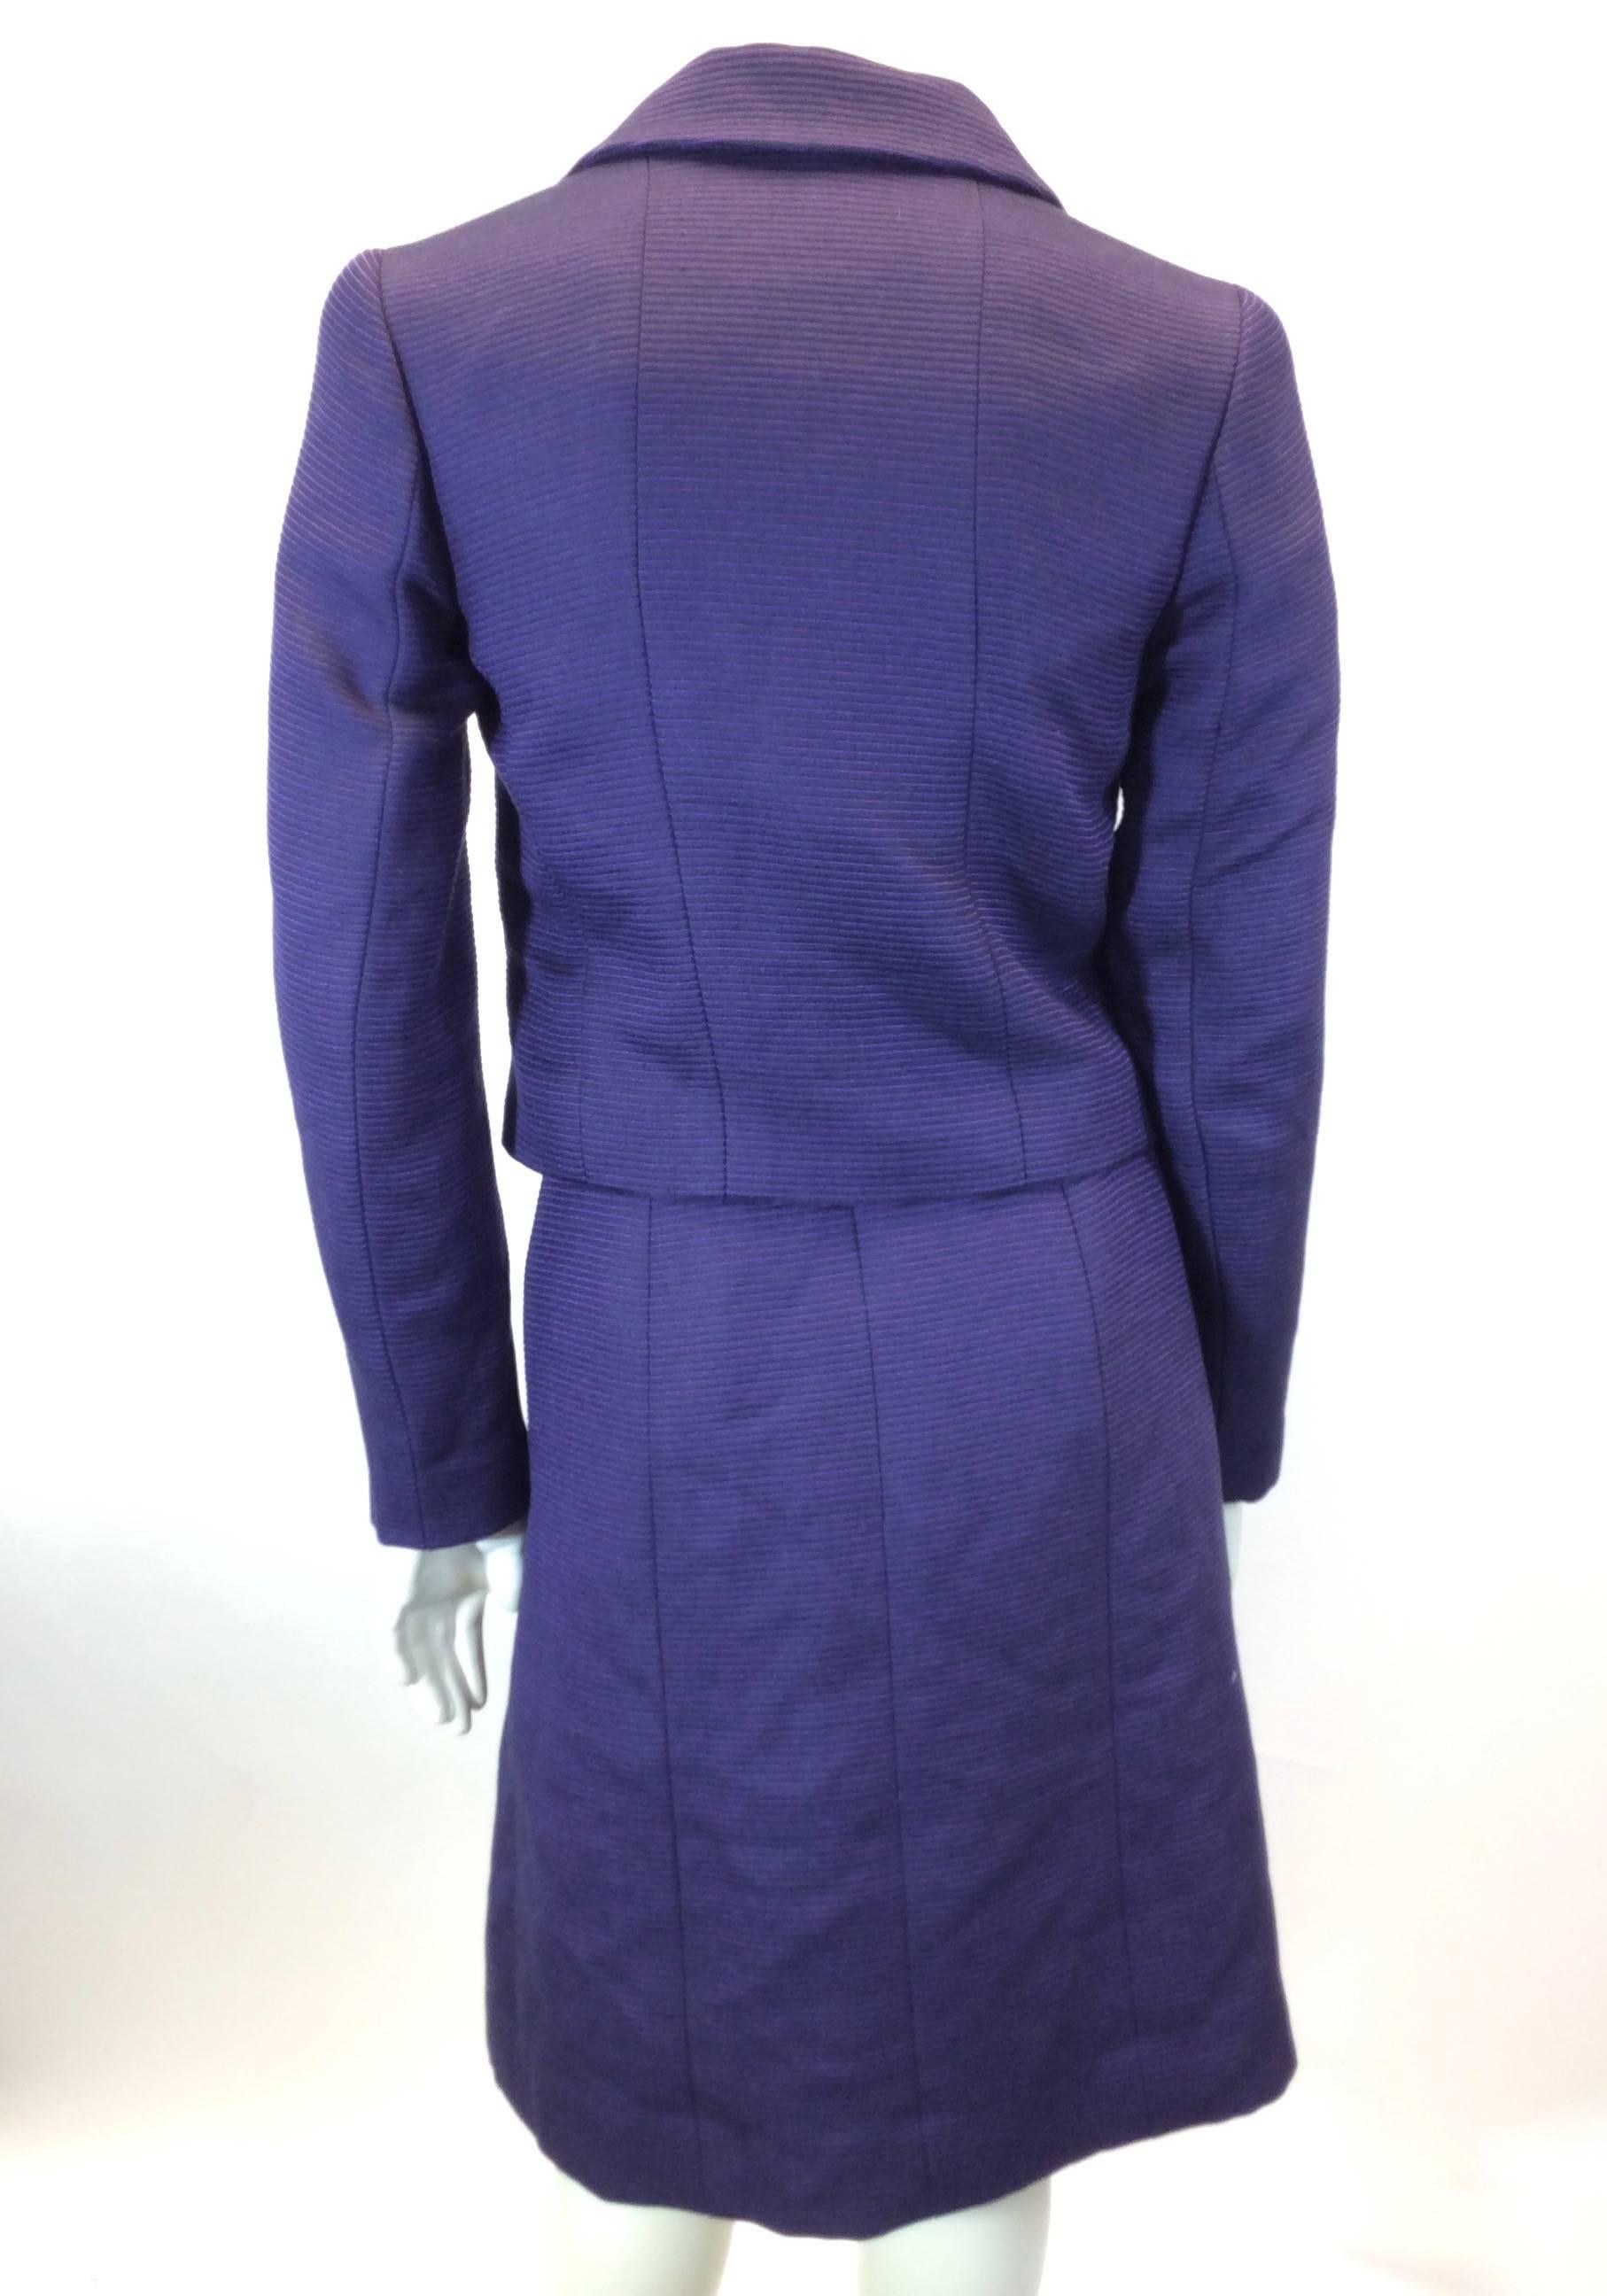 Women's HOLIDAY FLASH SALE! 50% Off! Chanel Two Piece Purple Skirt Suit Set